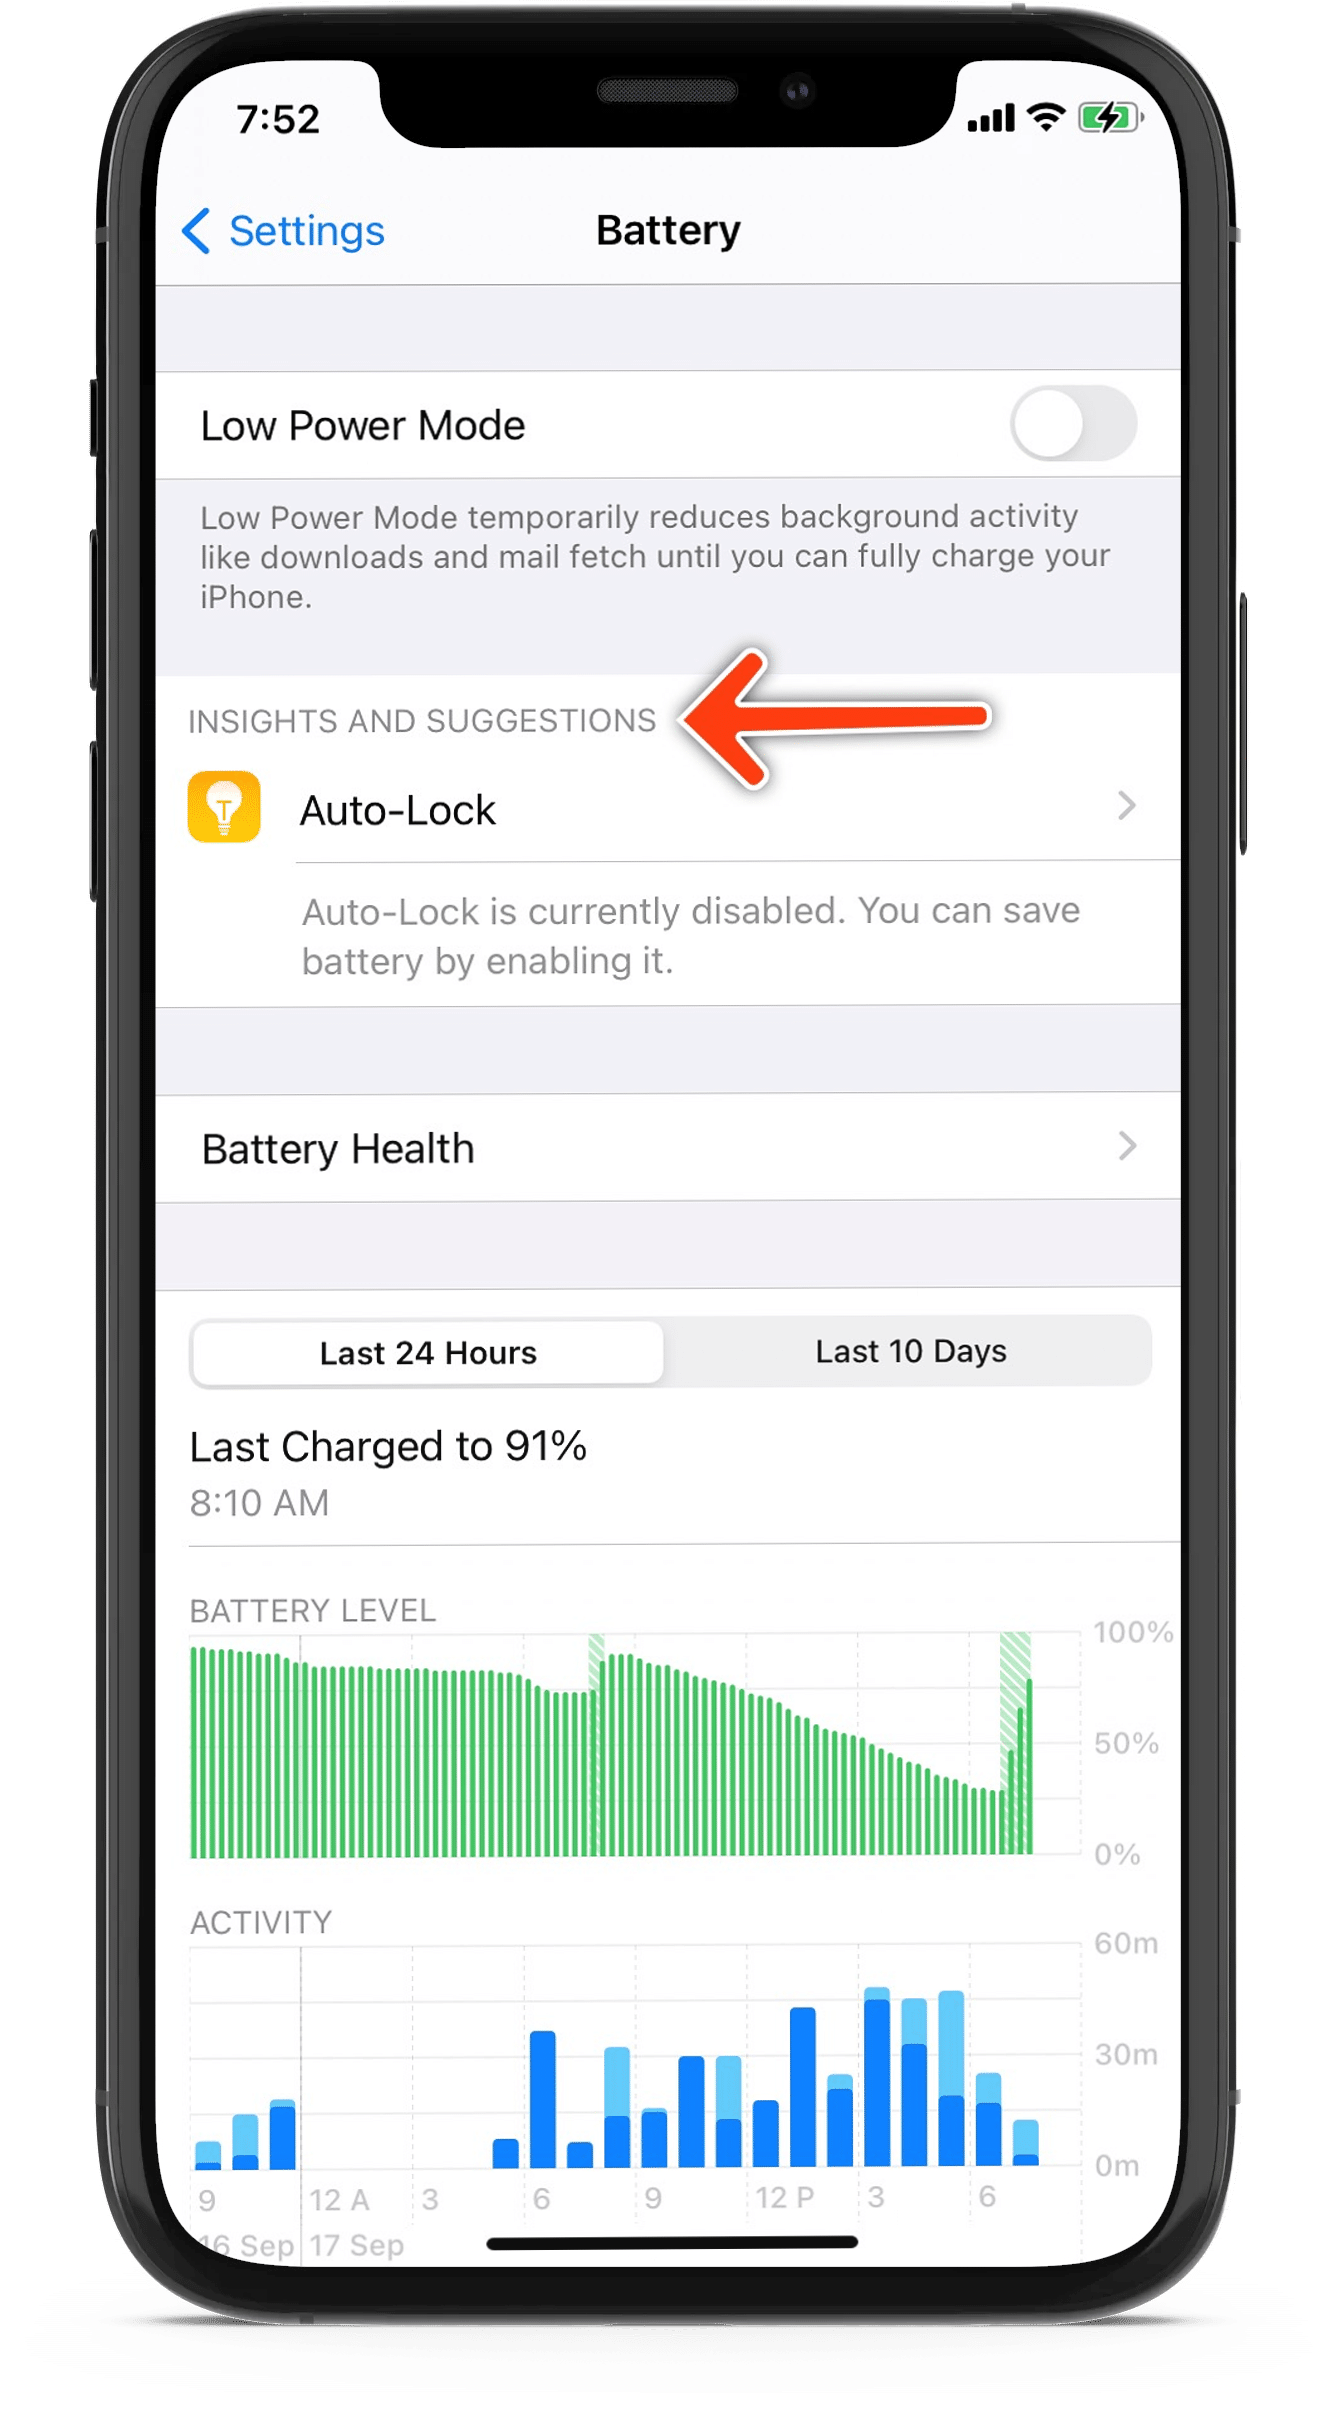 insights and suggestions to improve battery life